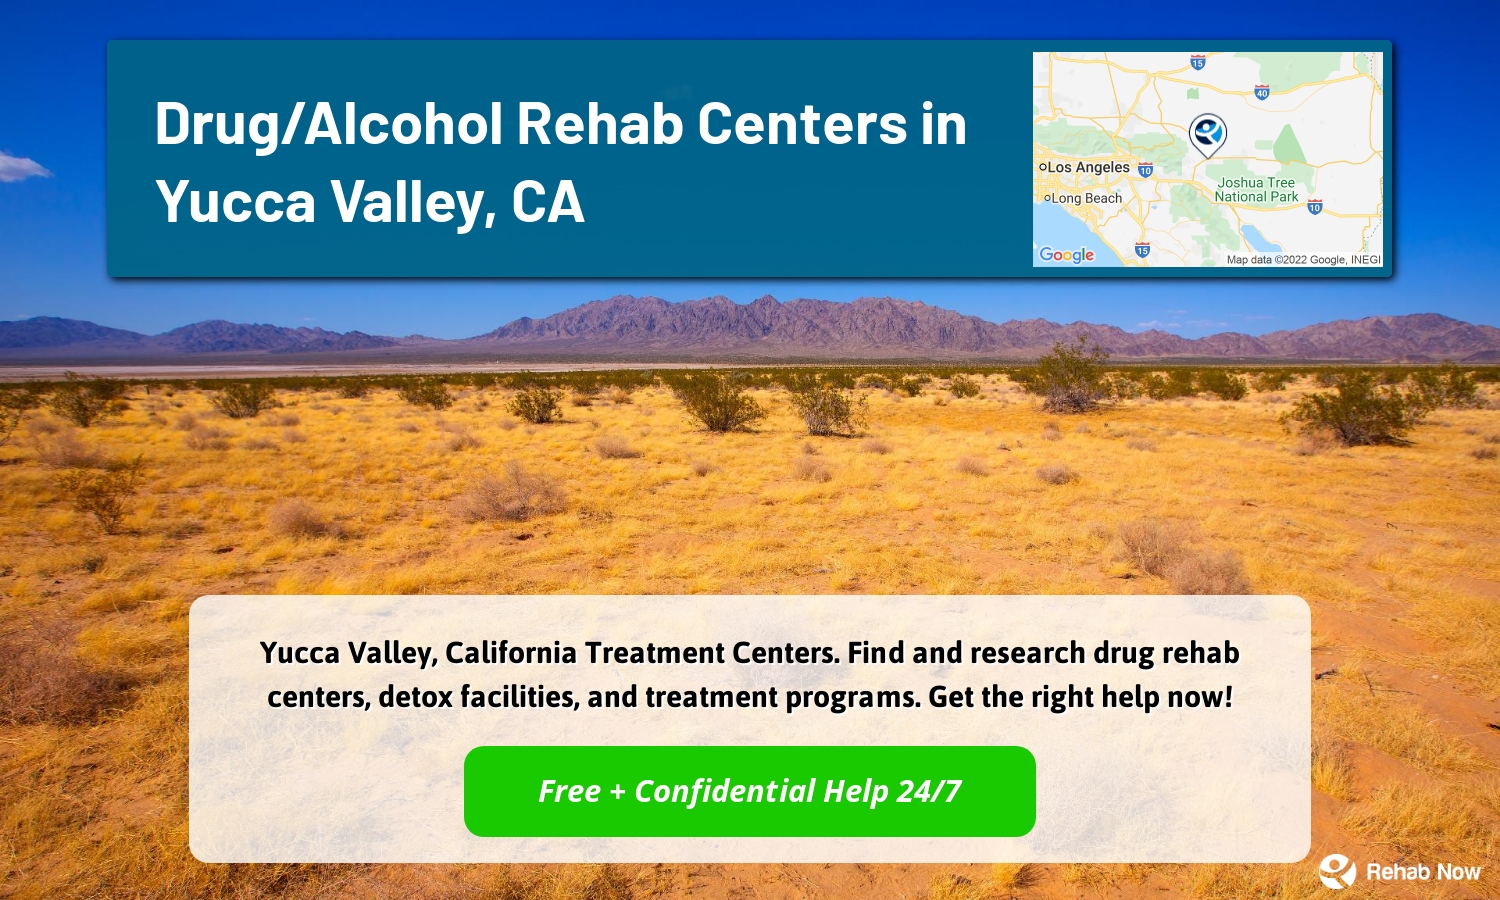 Yucca Valley, California Treatment Centers. Find and research drug rehab centers, detox facilities, and treatment programs. Get the right help now!